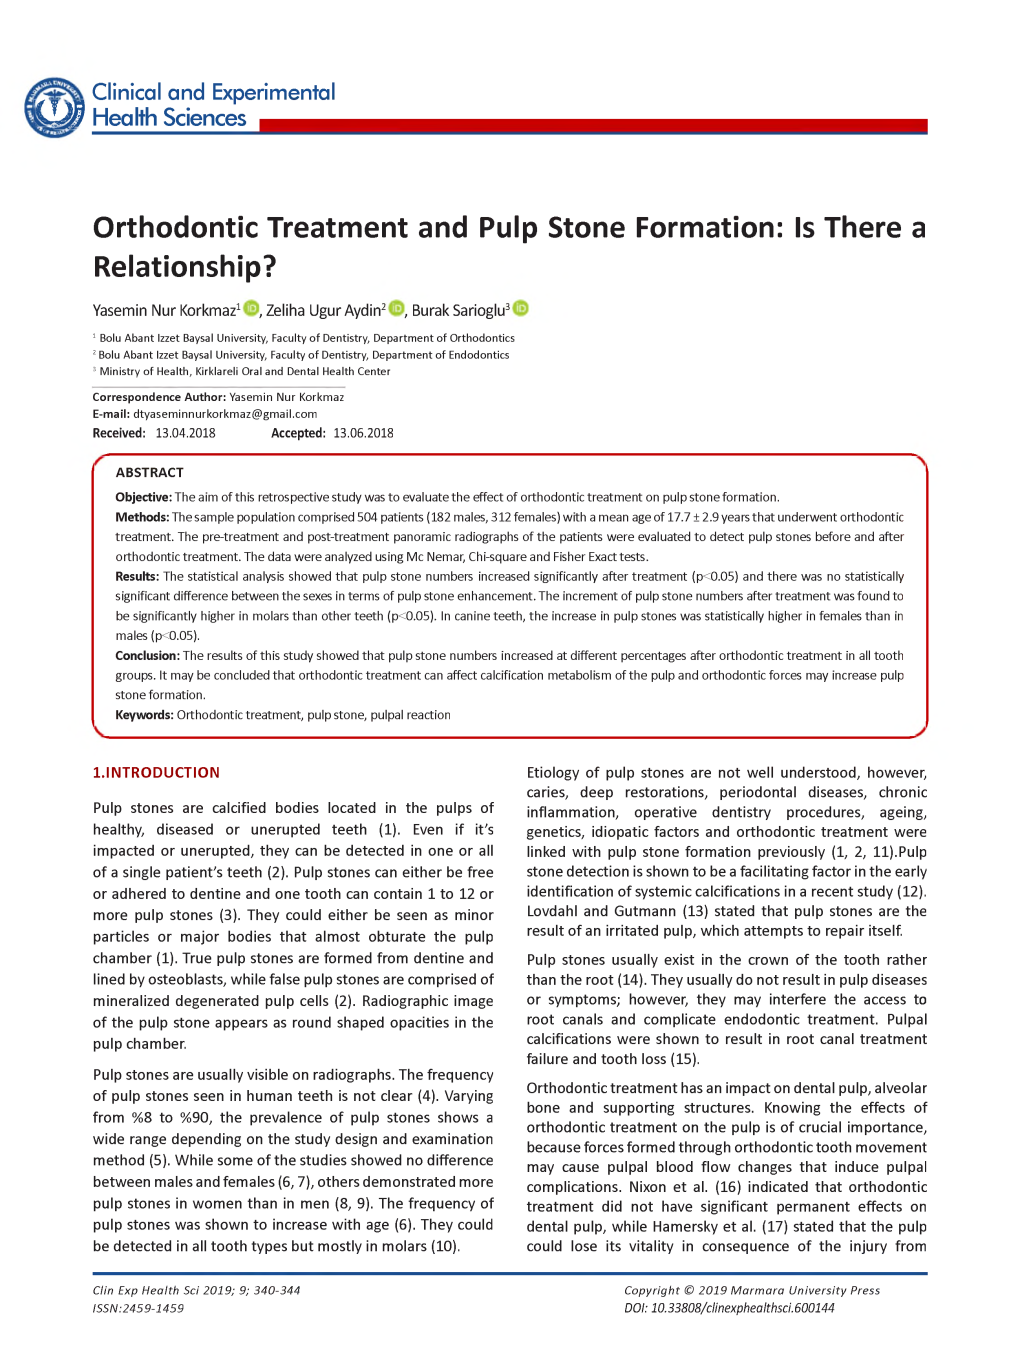 Orthodontic Treatment and Pulp Stone Formation: Is There a Relationship?